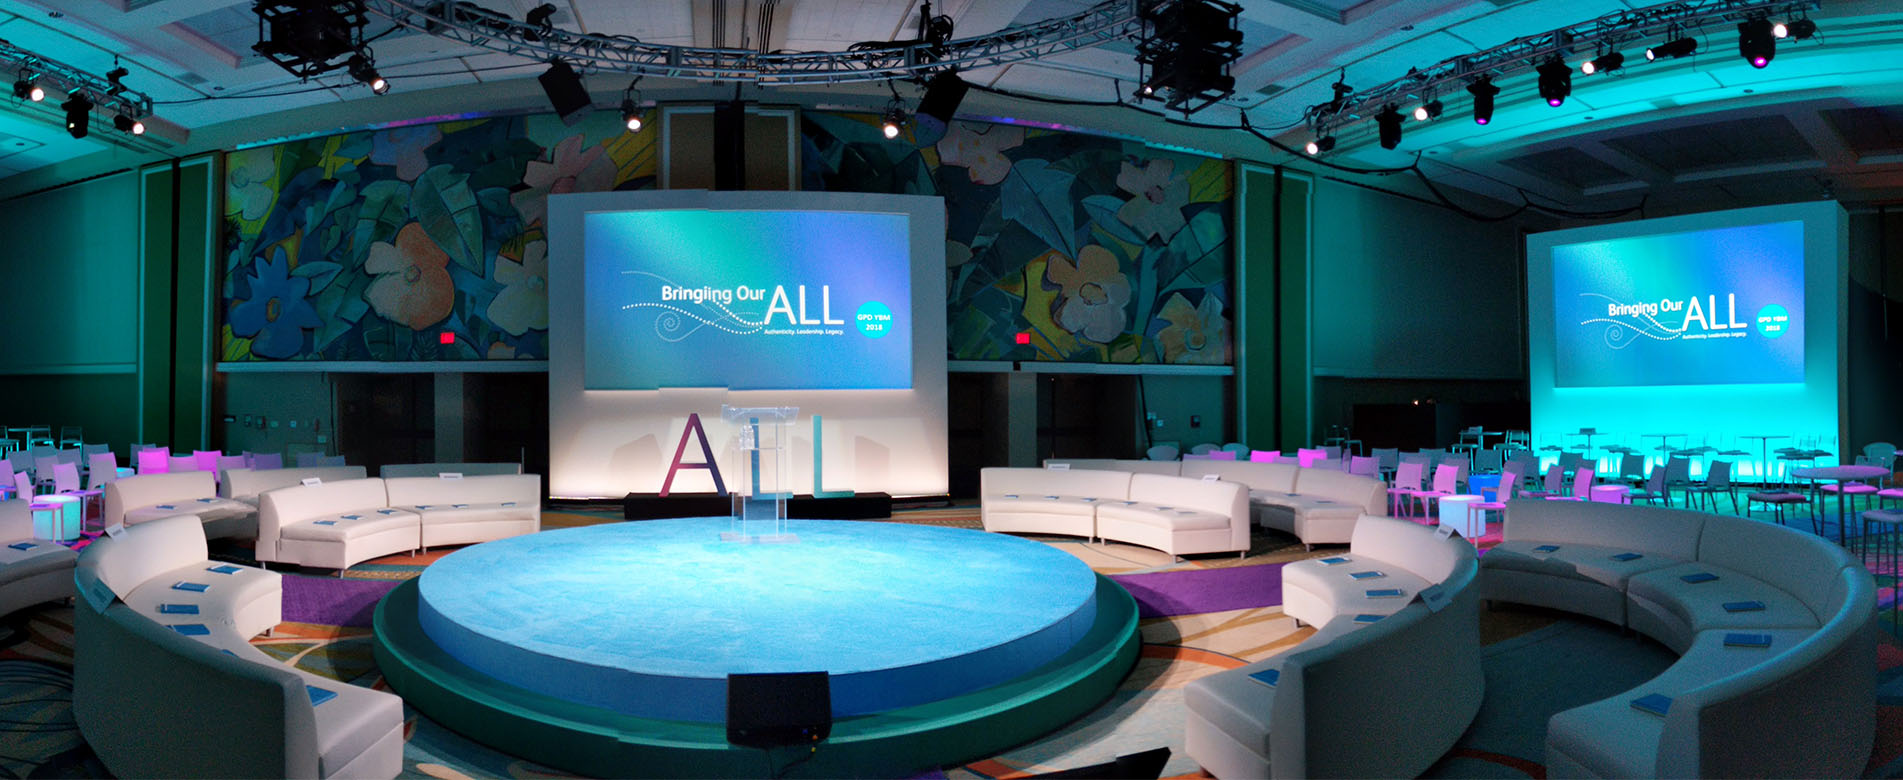 event staging and production - round stage